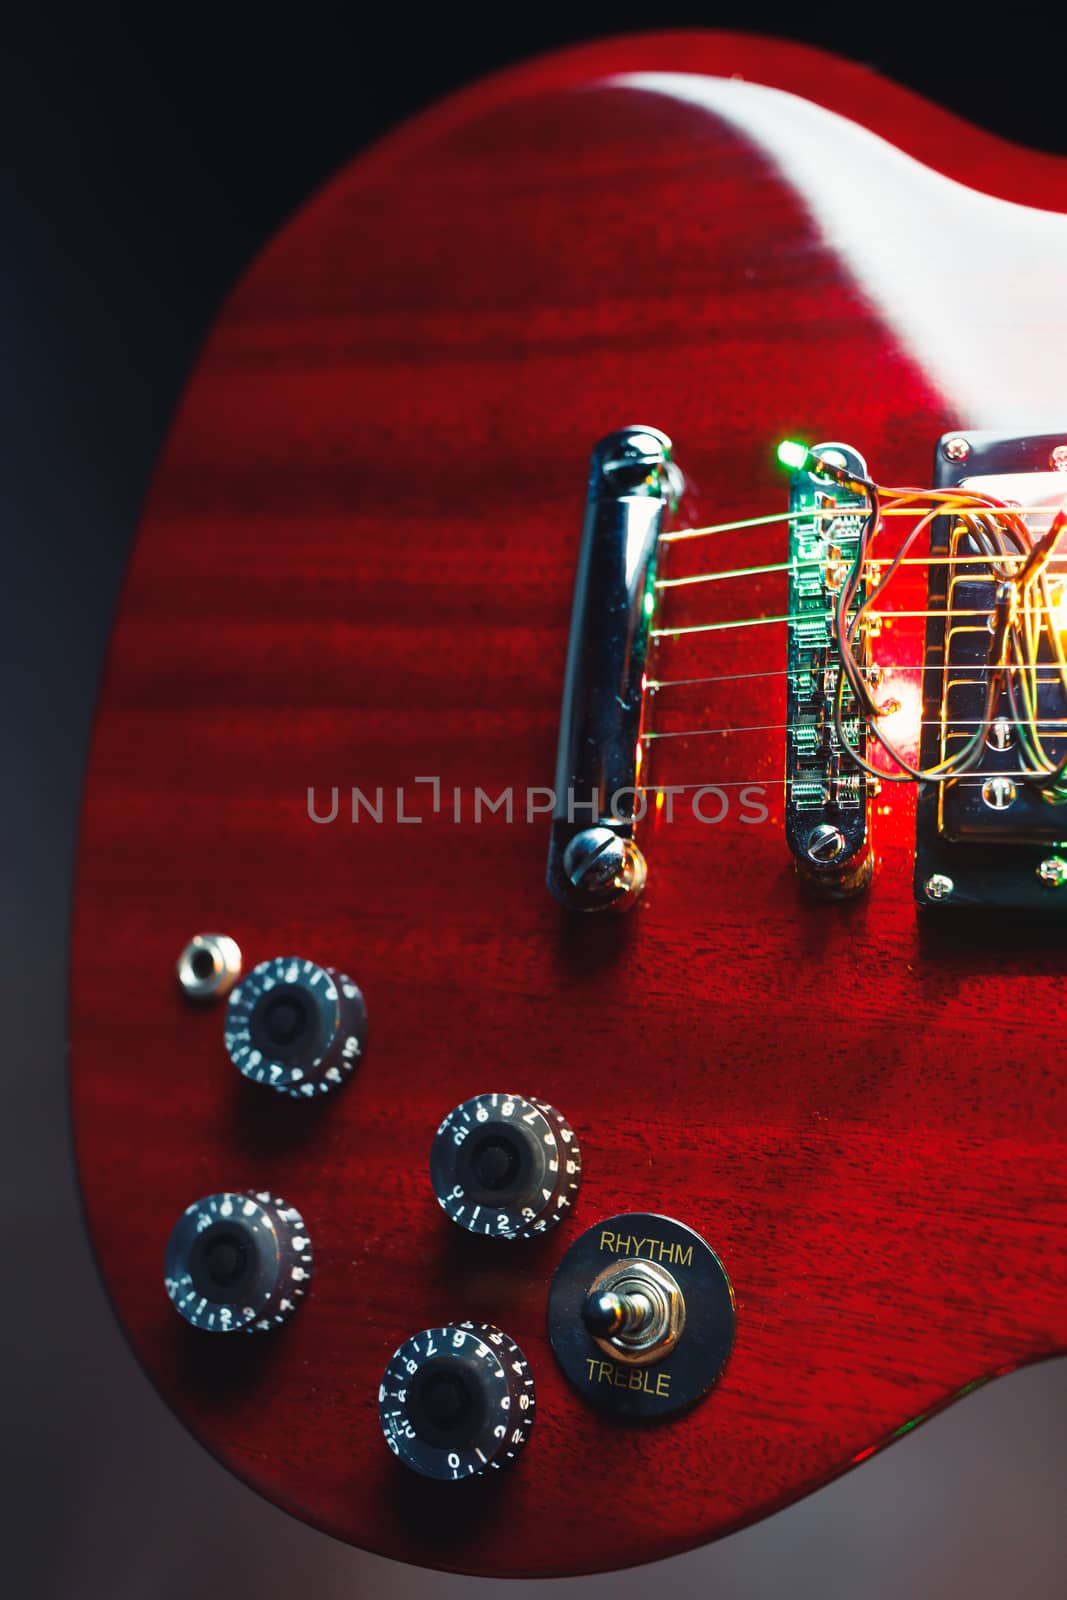 part of red guitar, close-up view by nikkytok